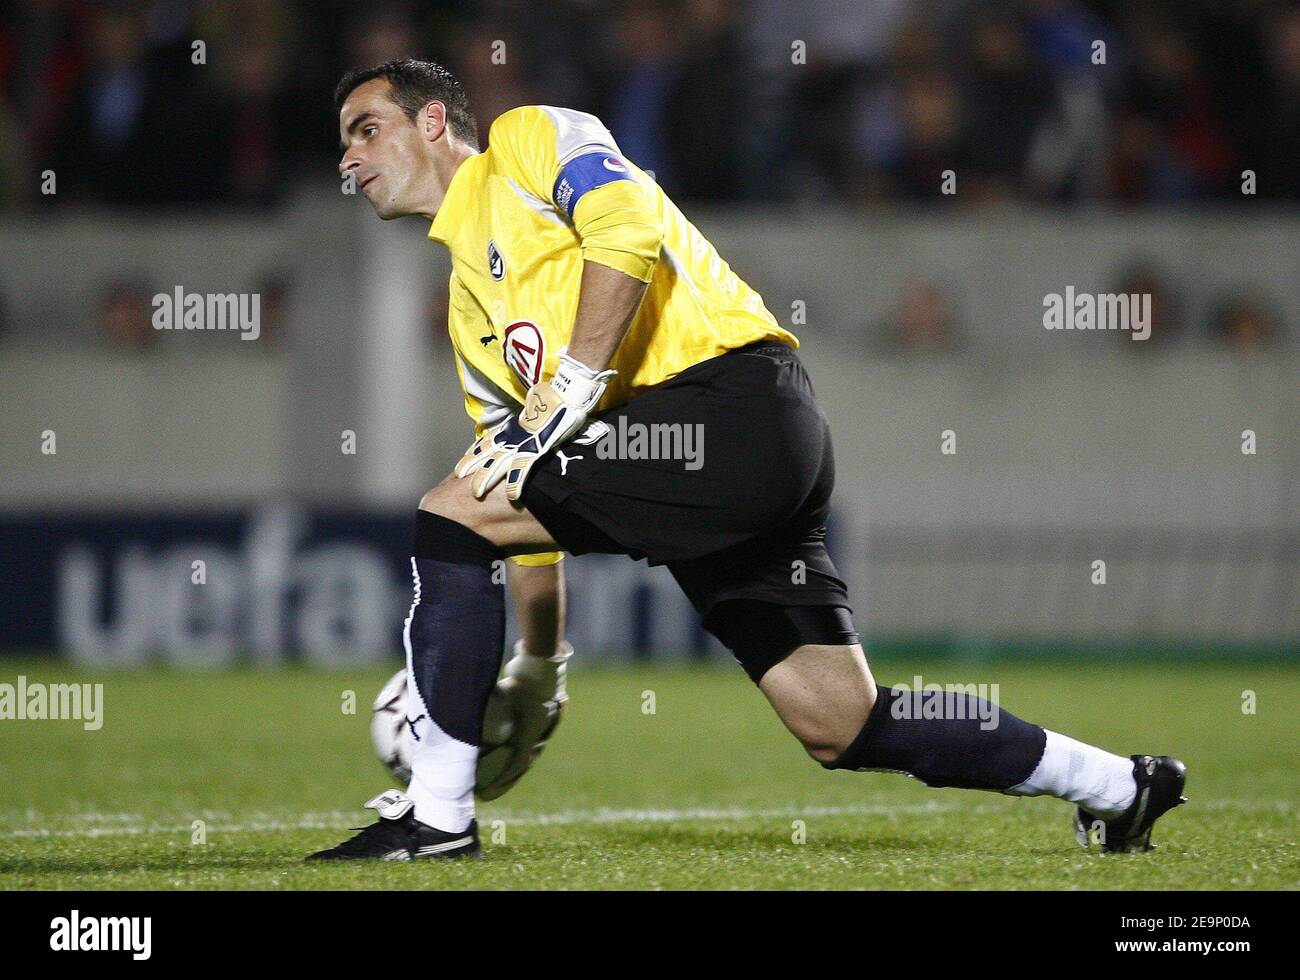 Bordeaux' goalkeeper Ulrich Rame during the UEFA Champions League, Group C, Girondins de Bordeaux vs Liverpool FC at the Stade Chaban-Delmas in Bordeaux, France on October 18, 2006. Liverpool won 1-0. Photo by Christian Liewig/ABACAPRESS.COM Stock Photo